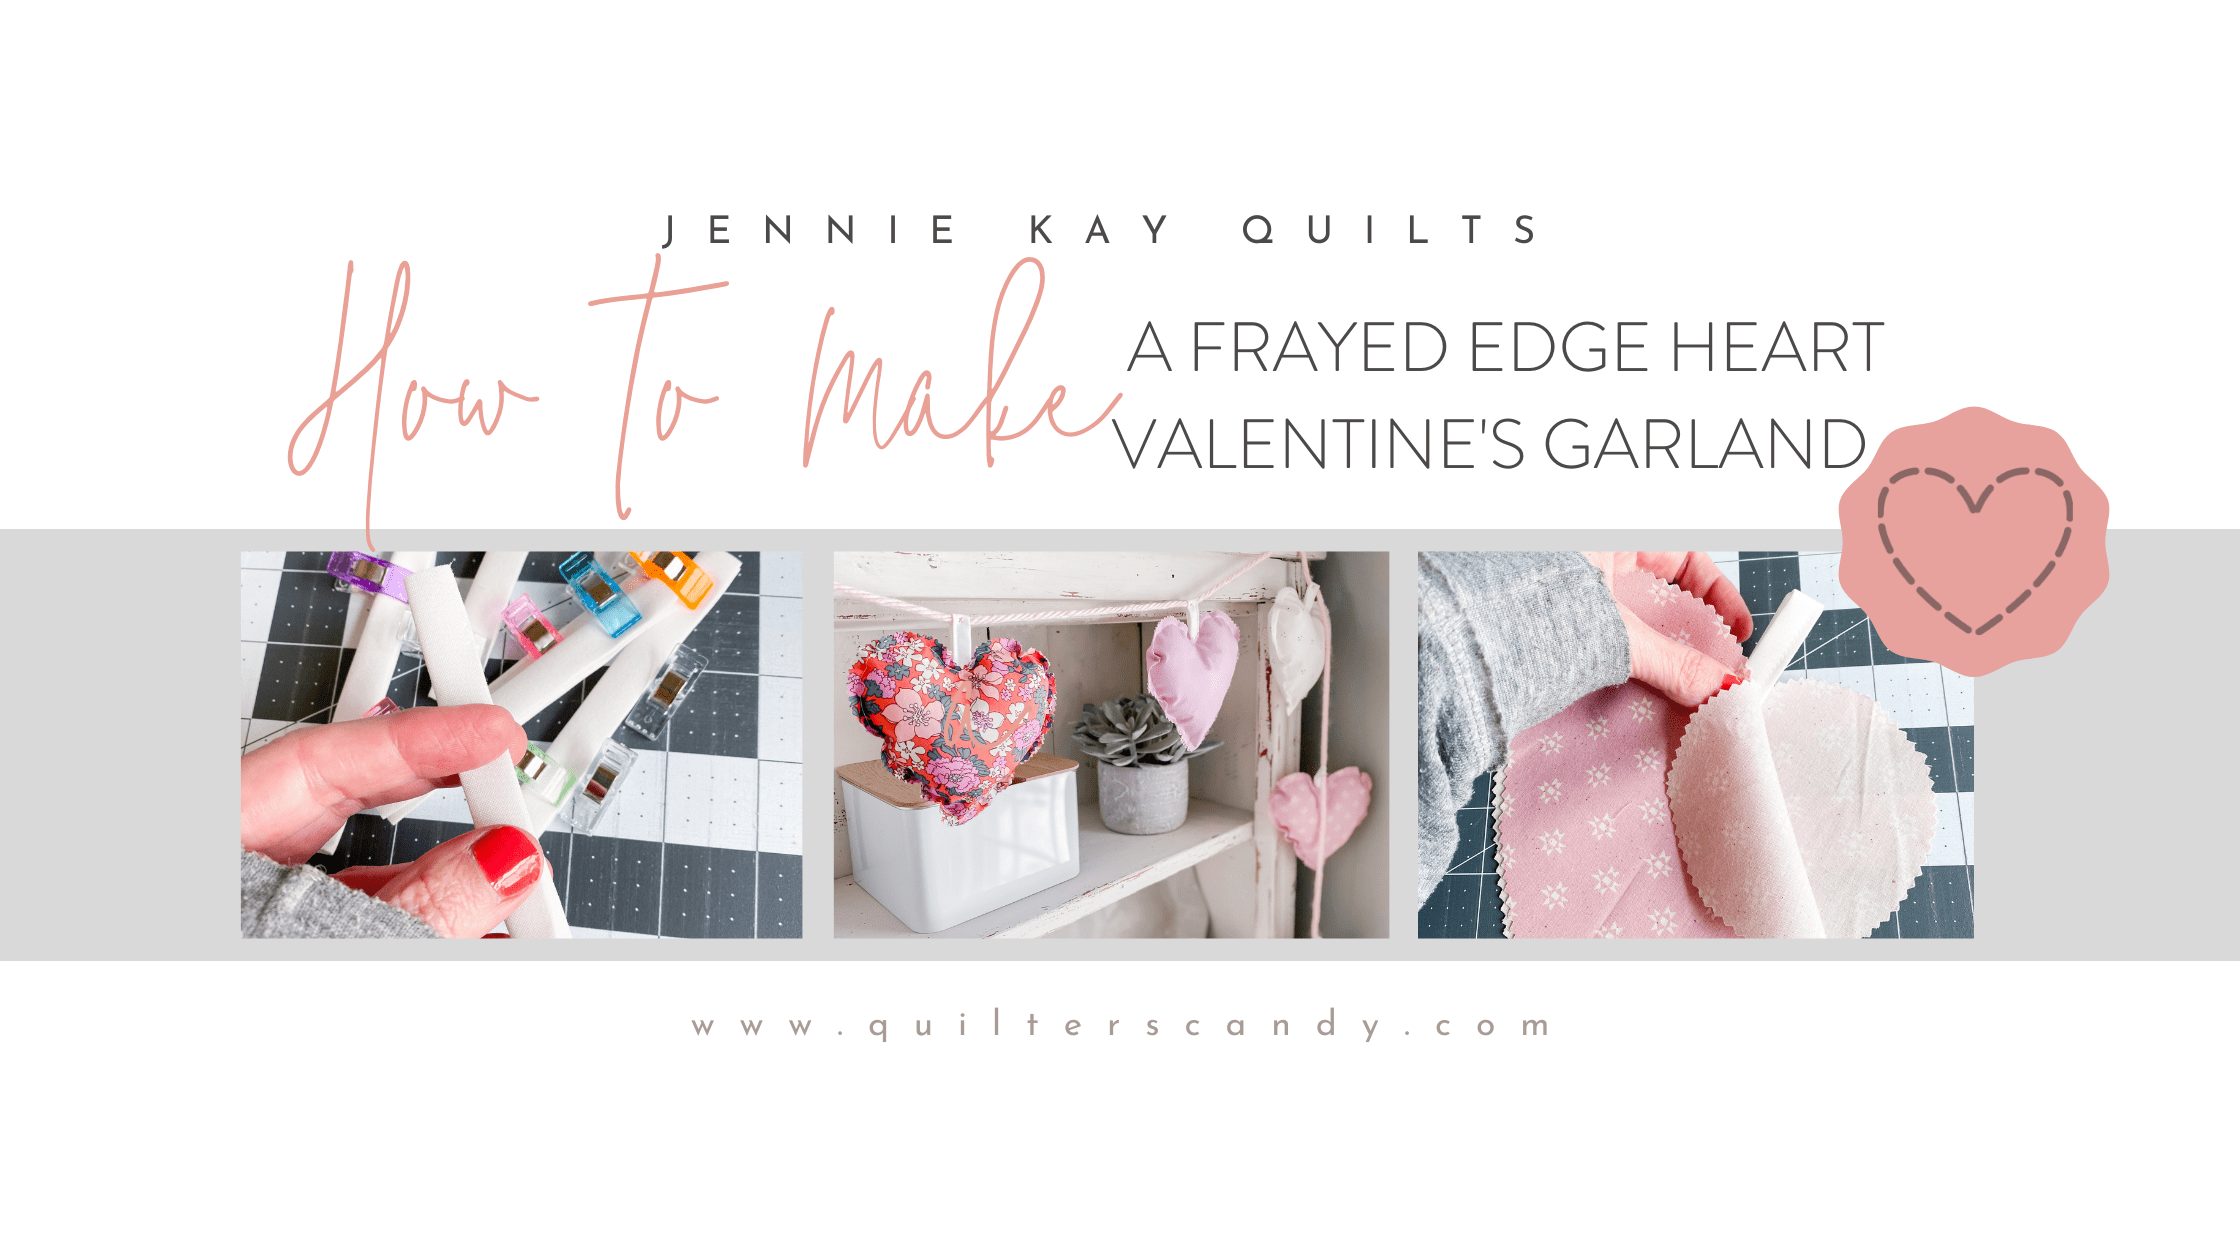 Guest Post - How to Make Frayed Edge Heart Valentine's Garland